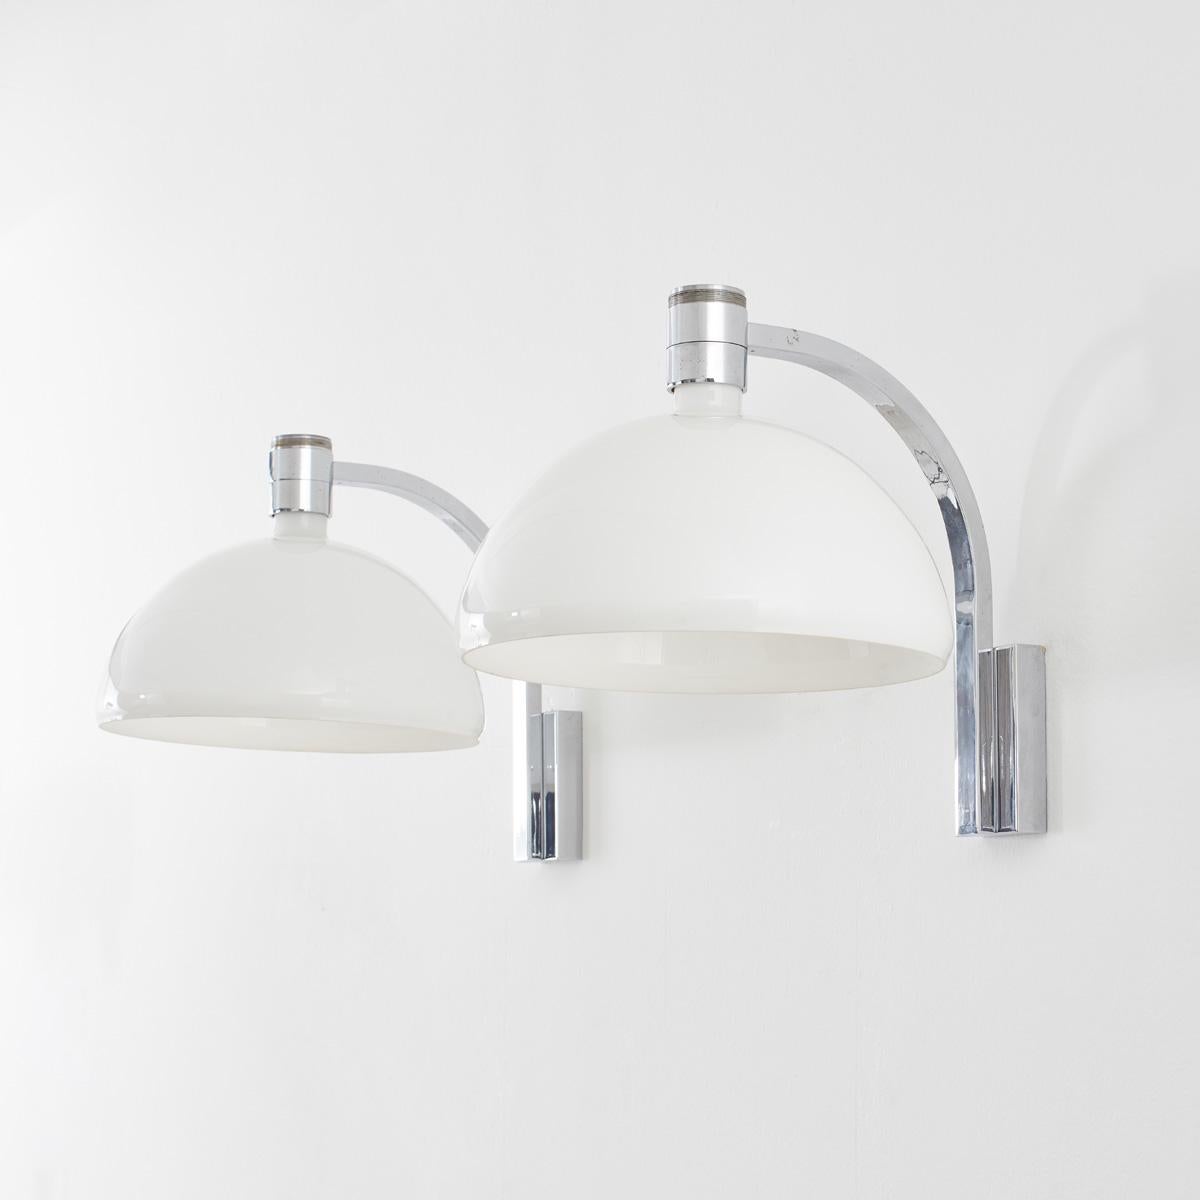 A pair of large wall lights with white glass shades mounted on chromed arms by Franco Albini, Franca Helg and Antonio Piva. This wall light is designed to allow for the glass shades to be mounted to light upwards or downwards.

The glass is in